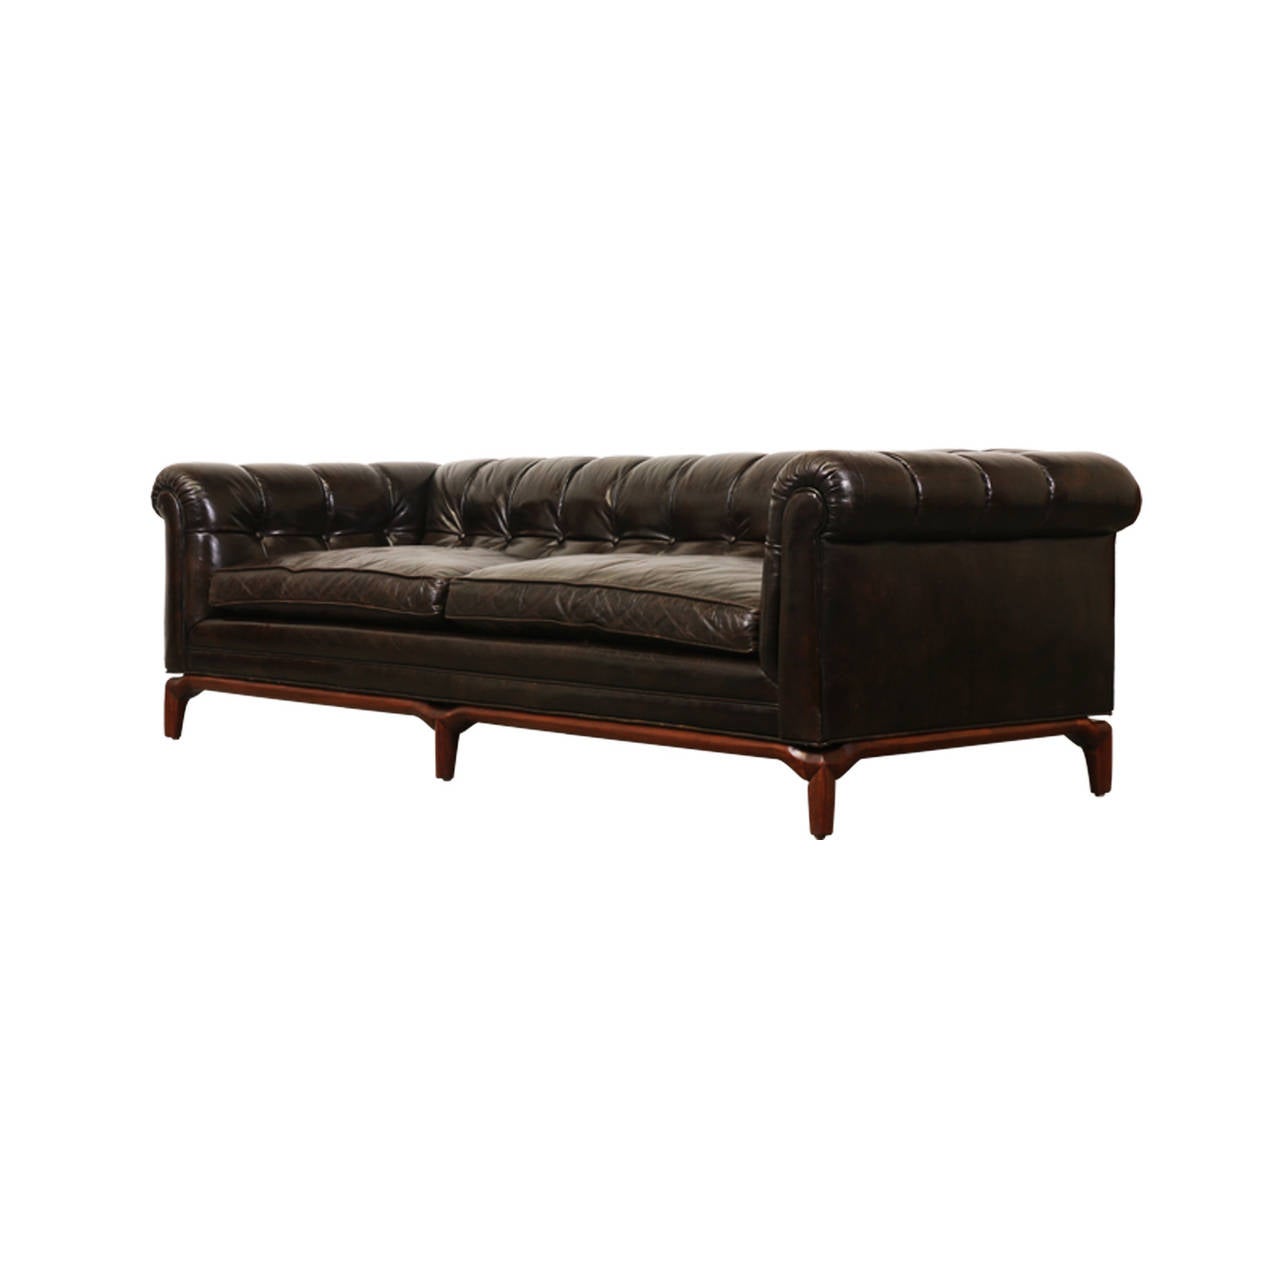 American Maurice Bailey Biscuit Tufted Leather Sofa for Monteverdi-Young